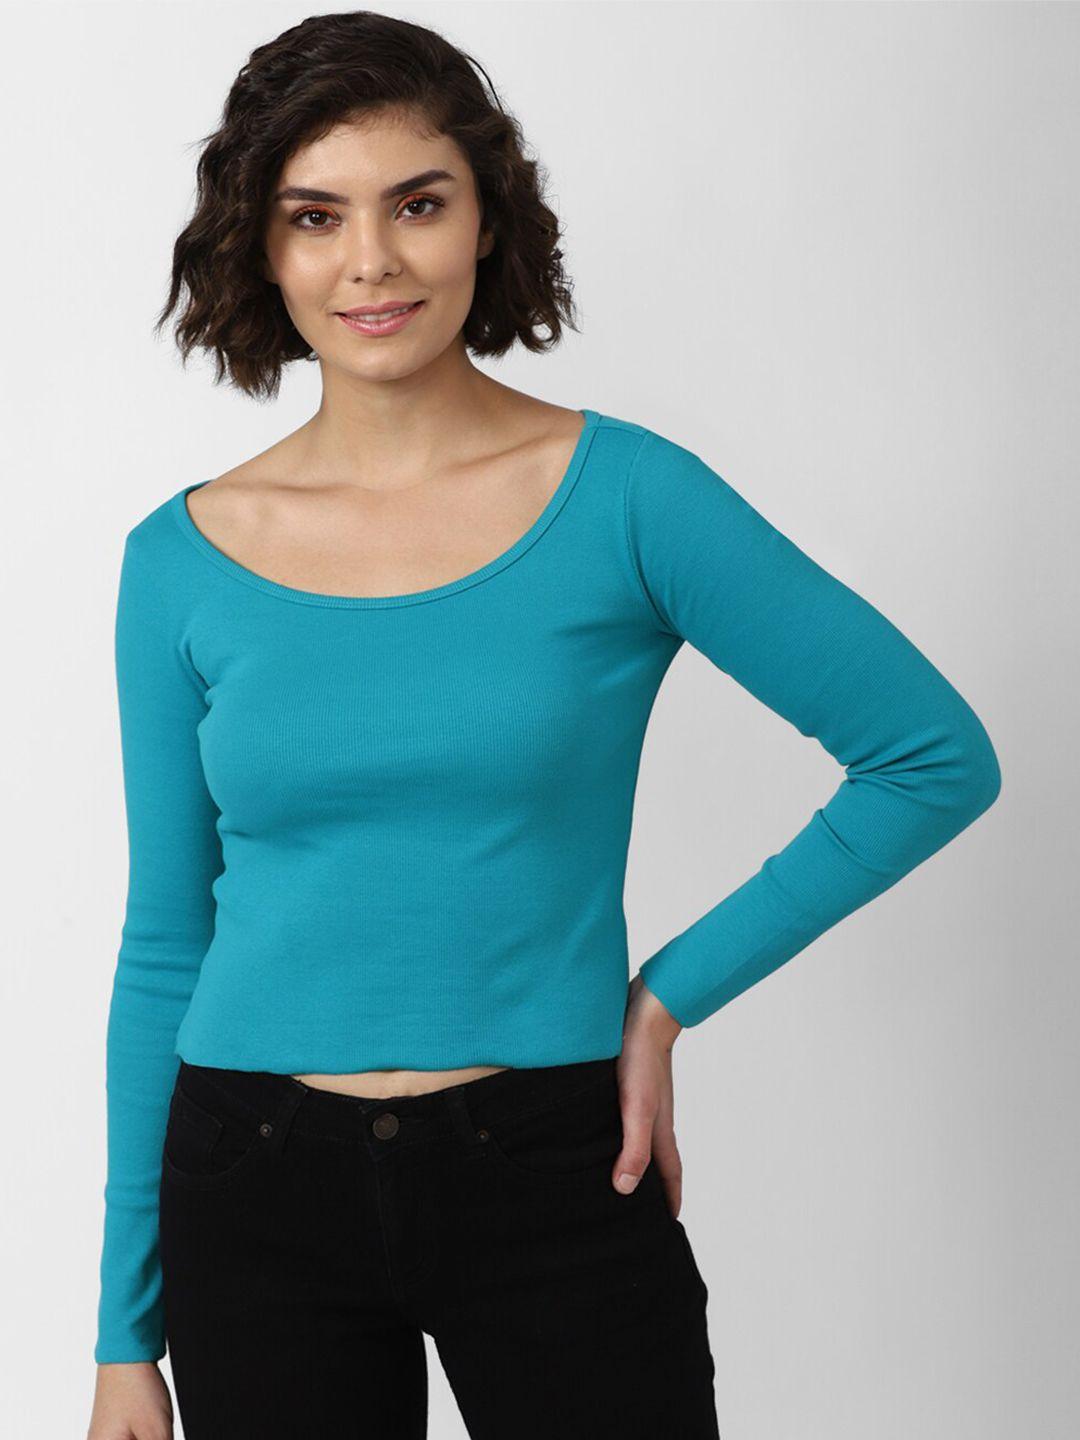 forever-21-women-teal-solid-crop-top